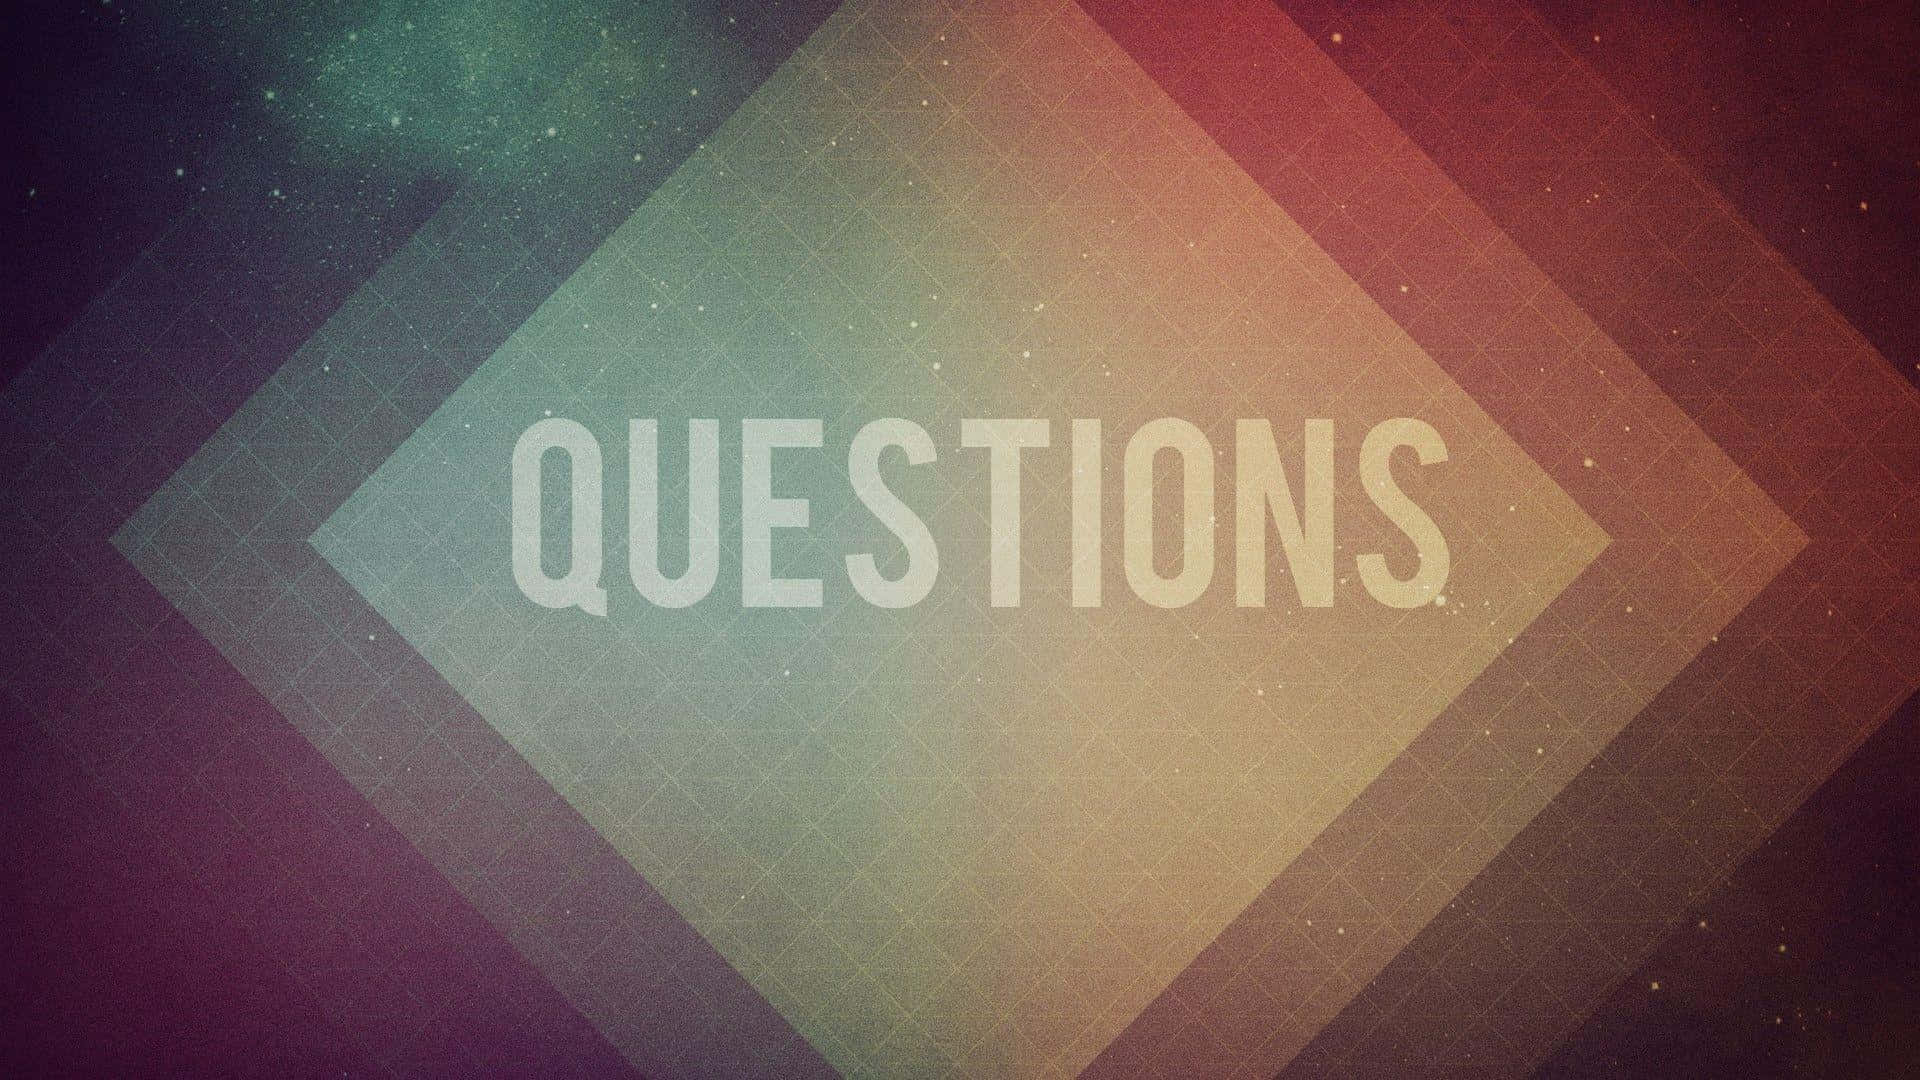 Questions - A Geometric Background With The Words